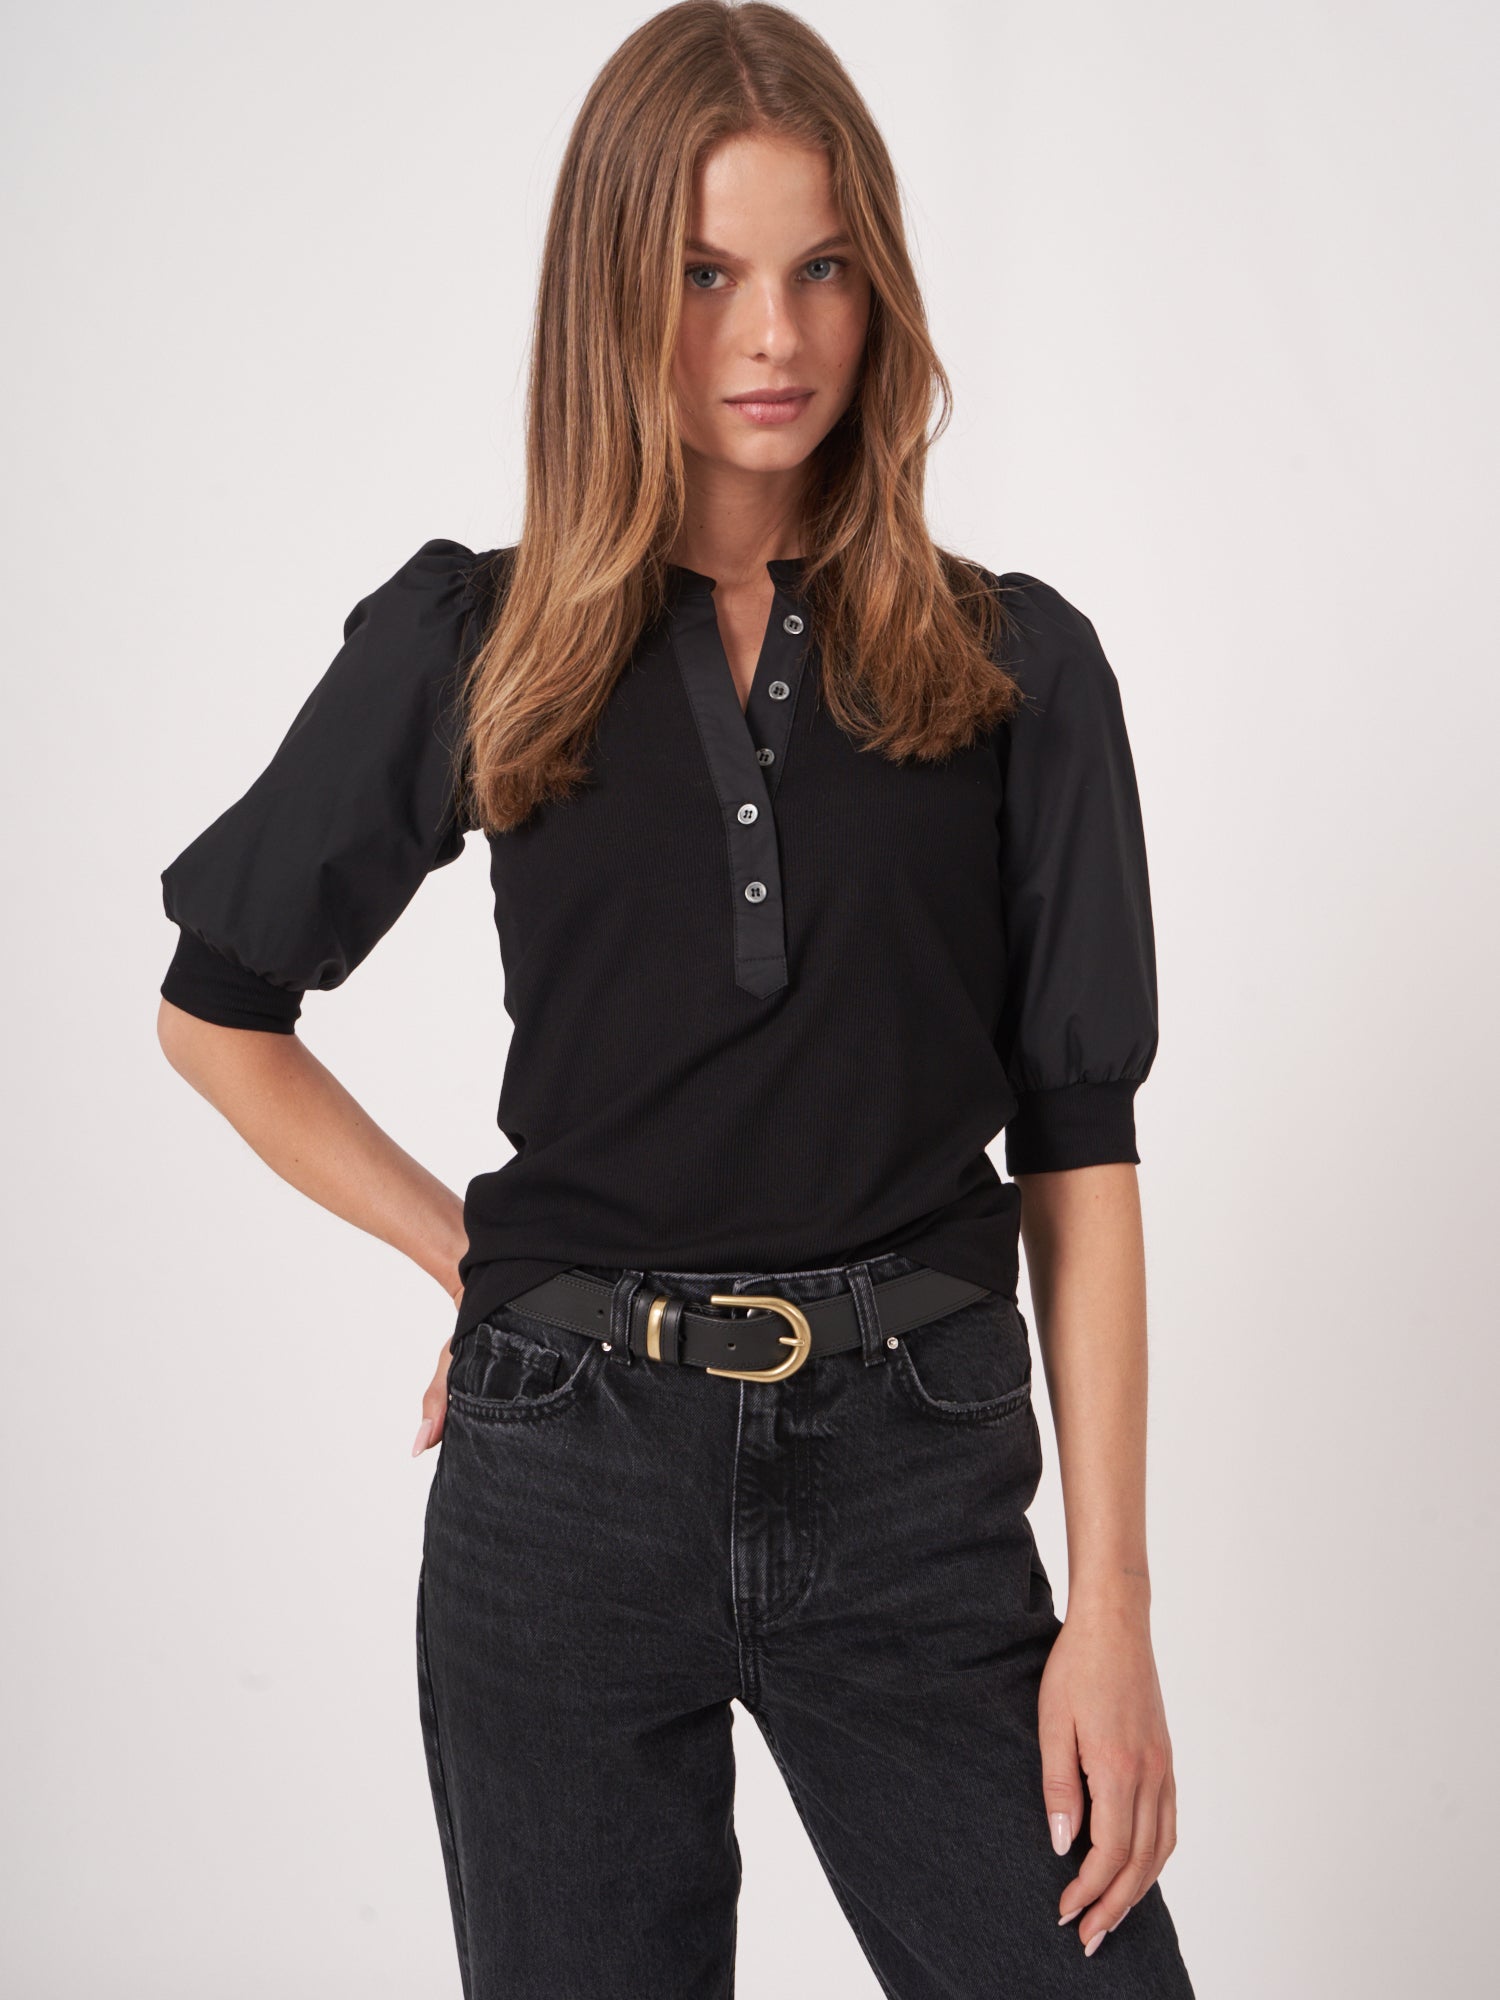 Repeat mix fabric top in Black